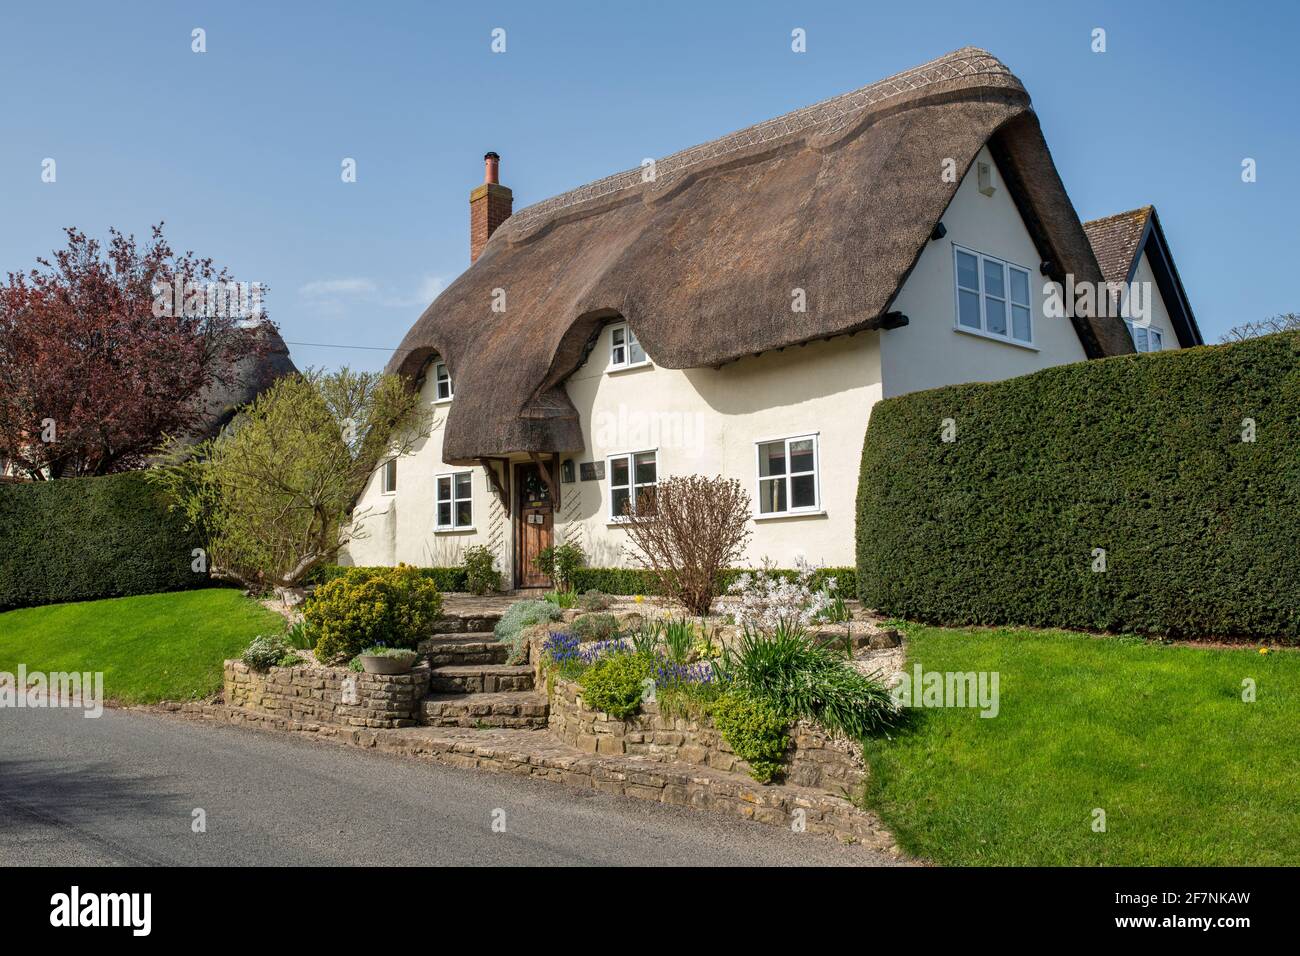 Thatched cottage in Great Comberton, Cotswolds, Wychavon district, Worcestershire, UK Stock Photo